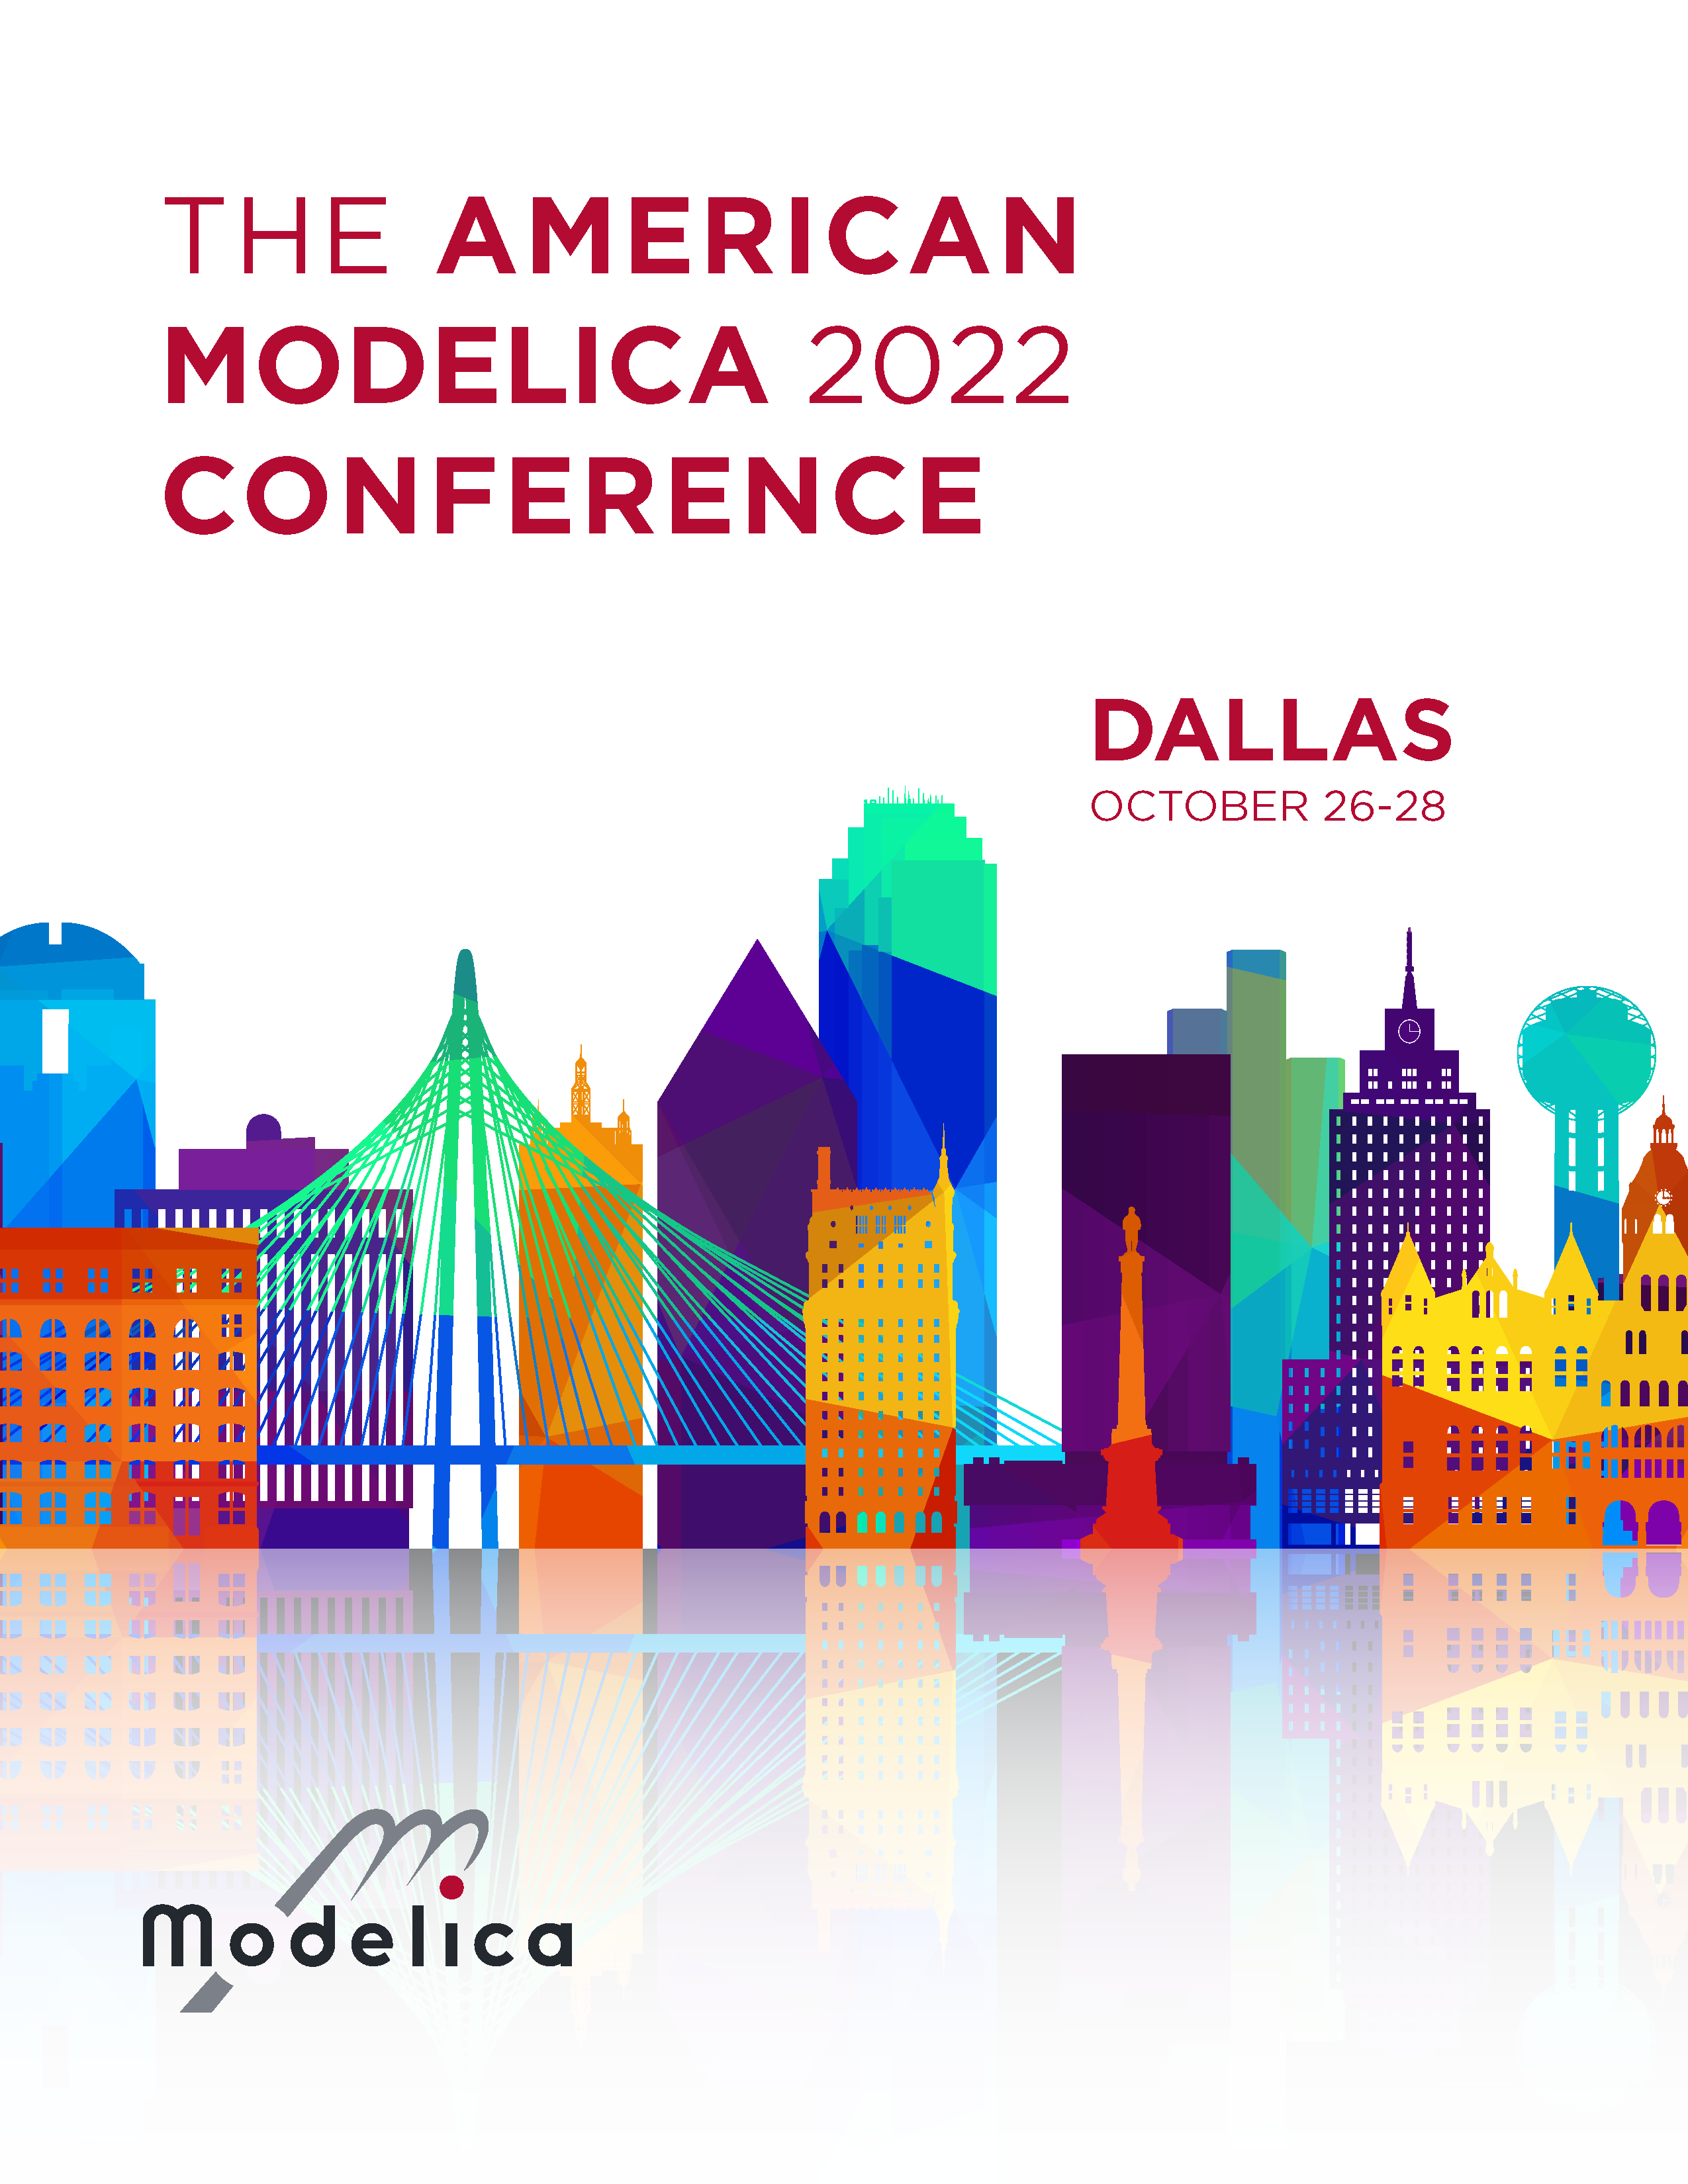 					View Proceedings of the American Modelica Conference 2022, Dallas, October 26-28
				